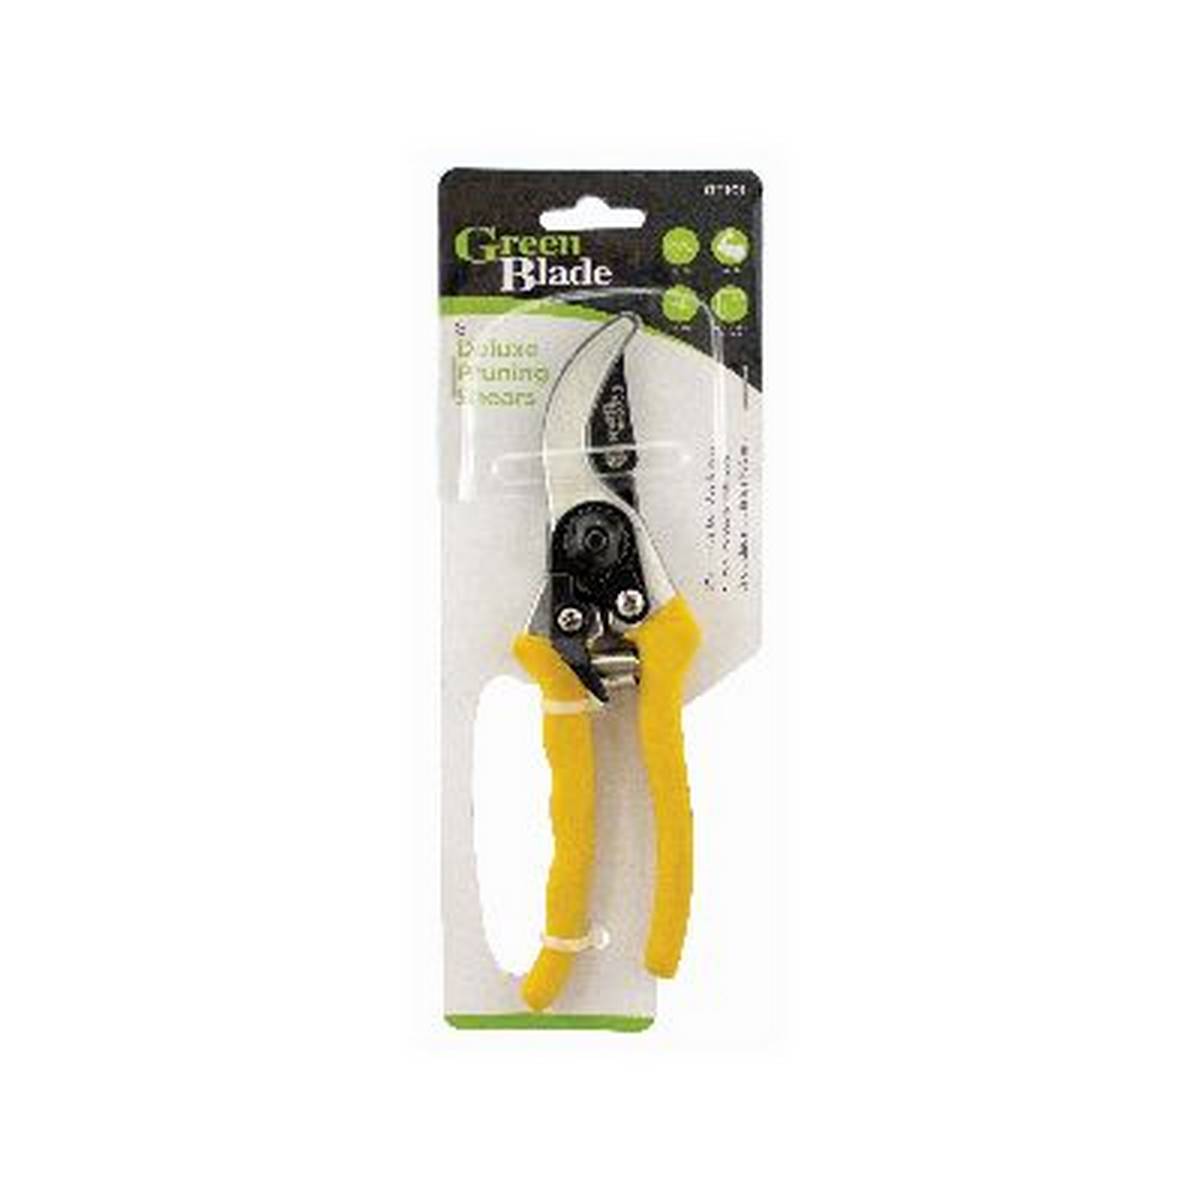 GREENBLADE GREEN BLADE 8" DELUXE PRUNING SHEARS BB-GT101